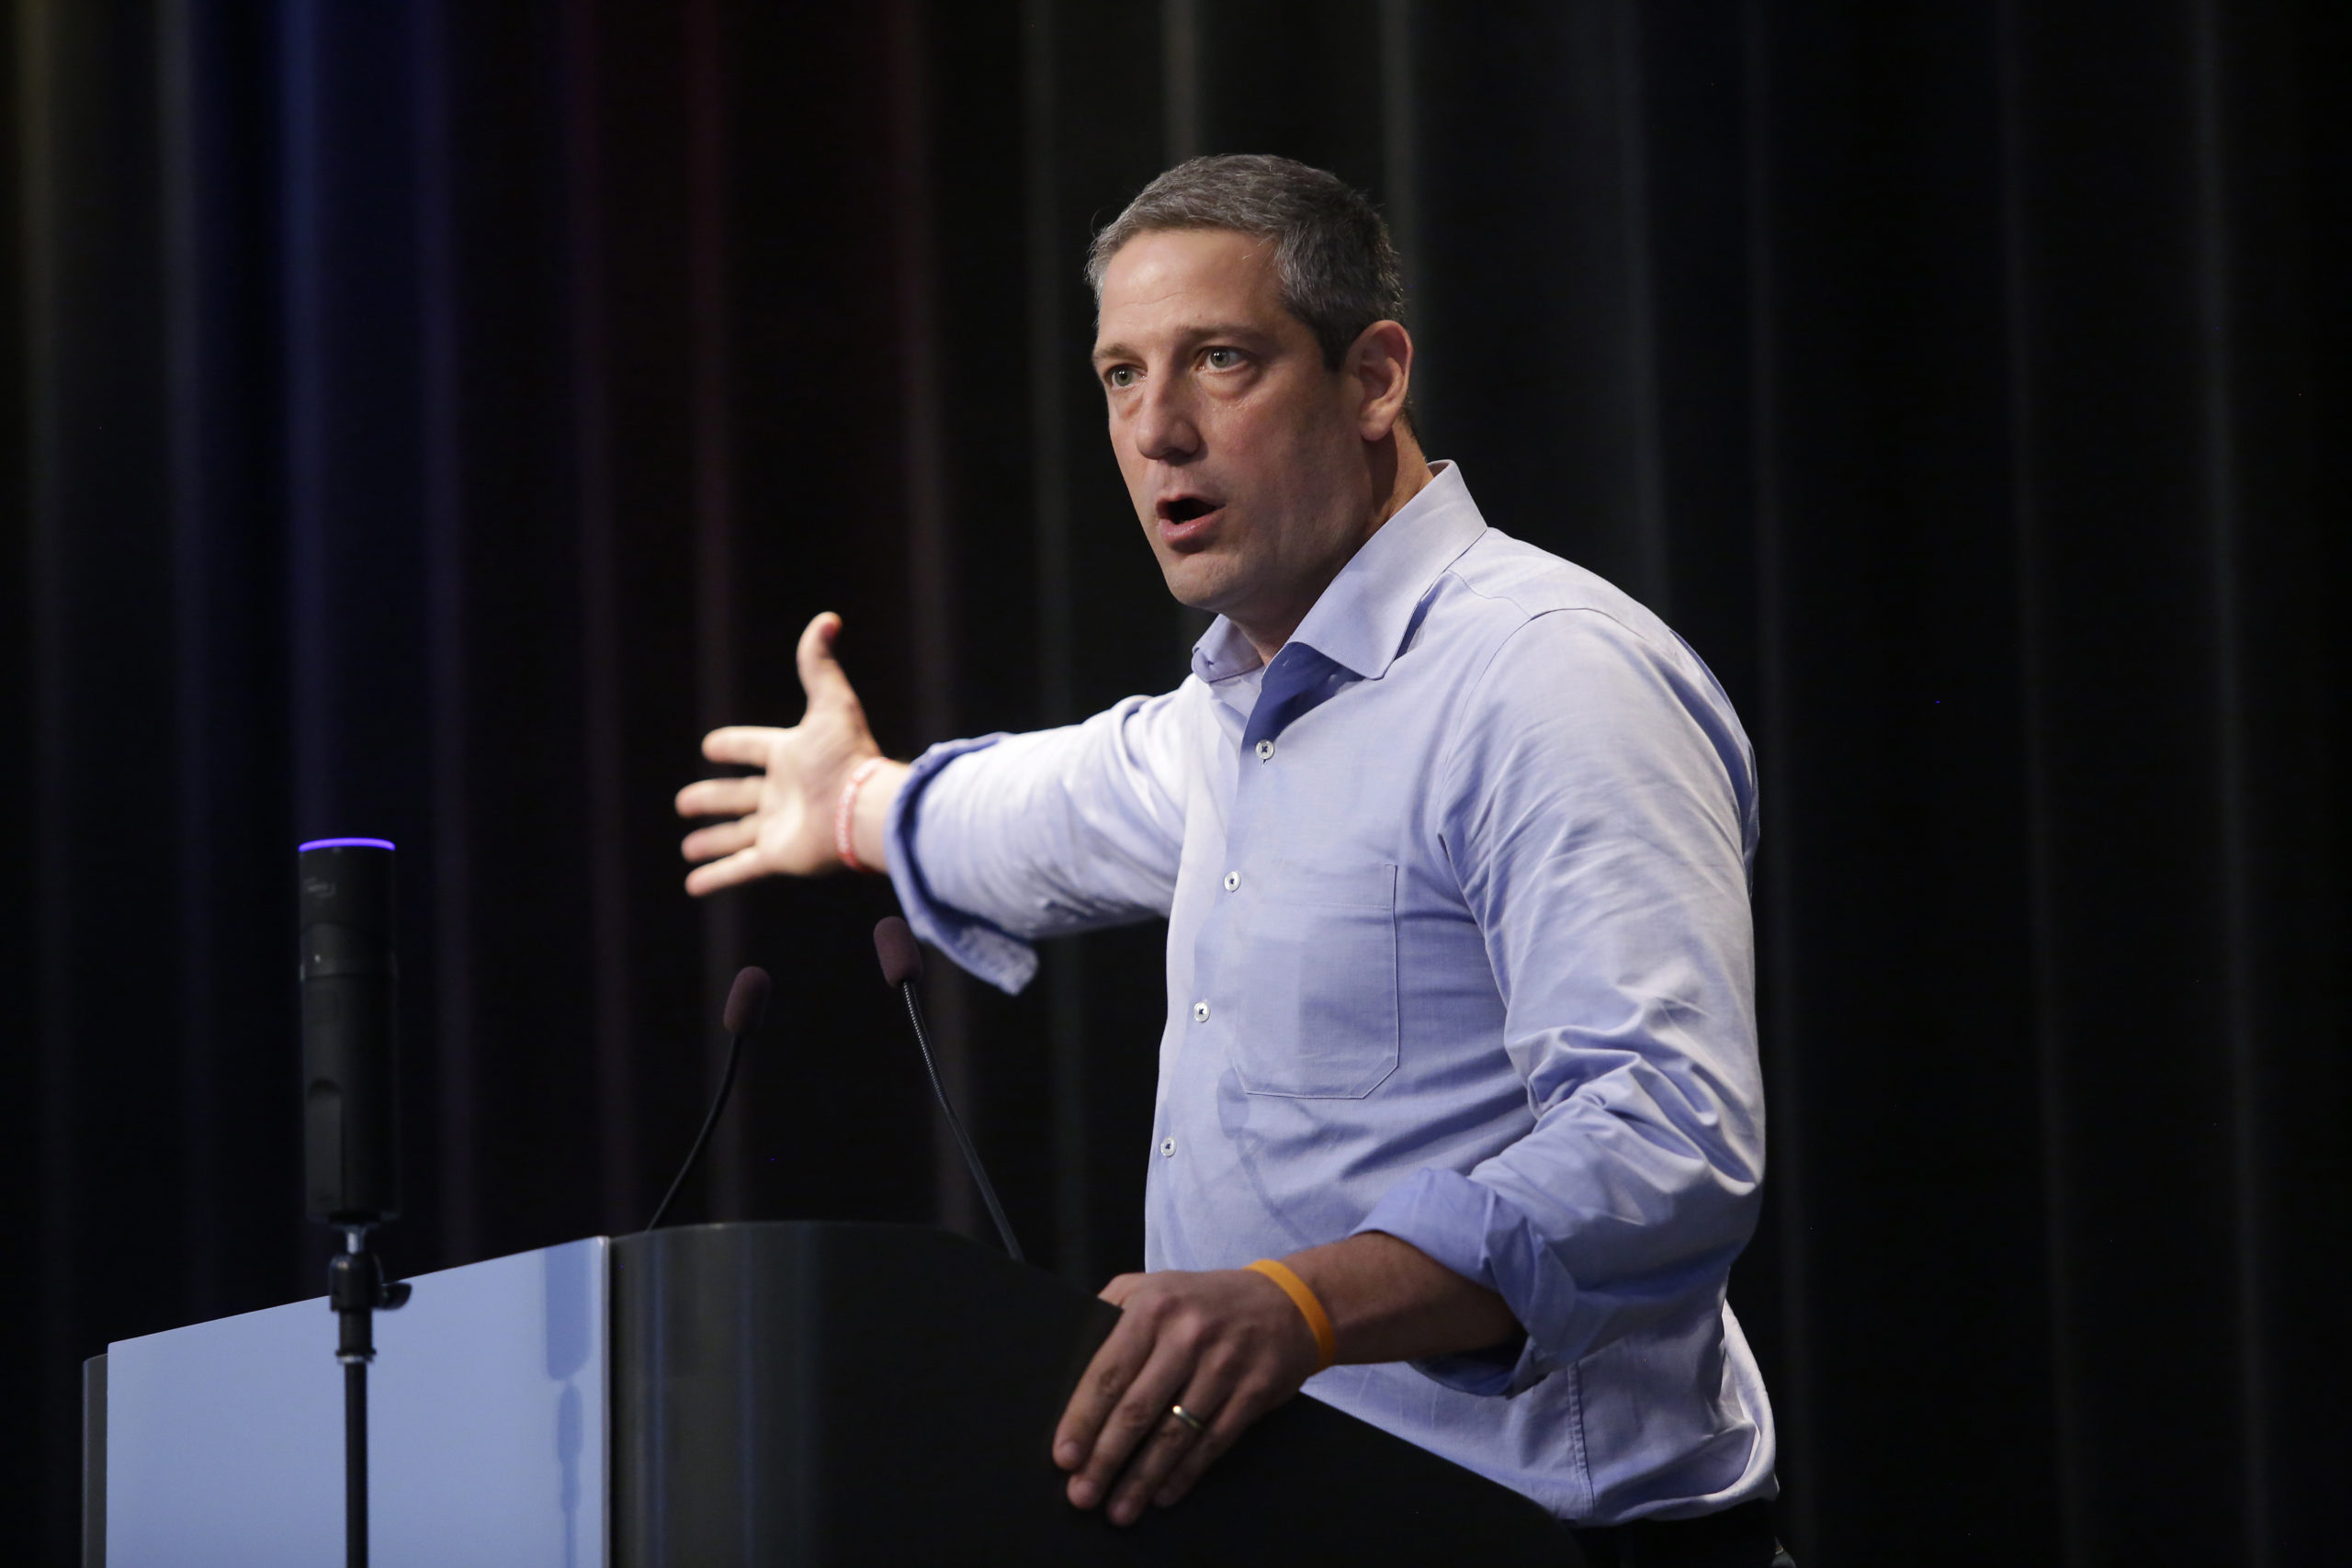 ALTOONA, IA - AUGUST 21: Democratic presidential candidate, U.S. Rep. for Ohio, Tim Ryan speaks at the Iowa Federation Labor Convention on August 21, 2019 in Altoona, Iowa. Candidates had 10 minutes each to address union members during the convention. The 2020 Democratic presidential Iowa caucuses will take place on Monday, February 3, 2020.(Photo by Joshua Lott/Getty Images)